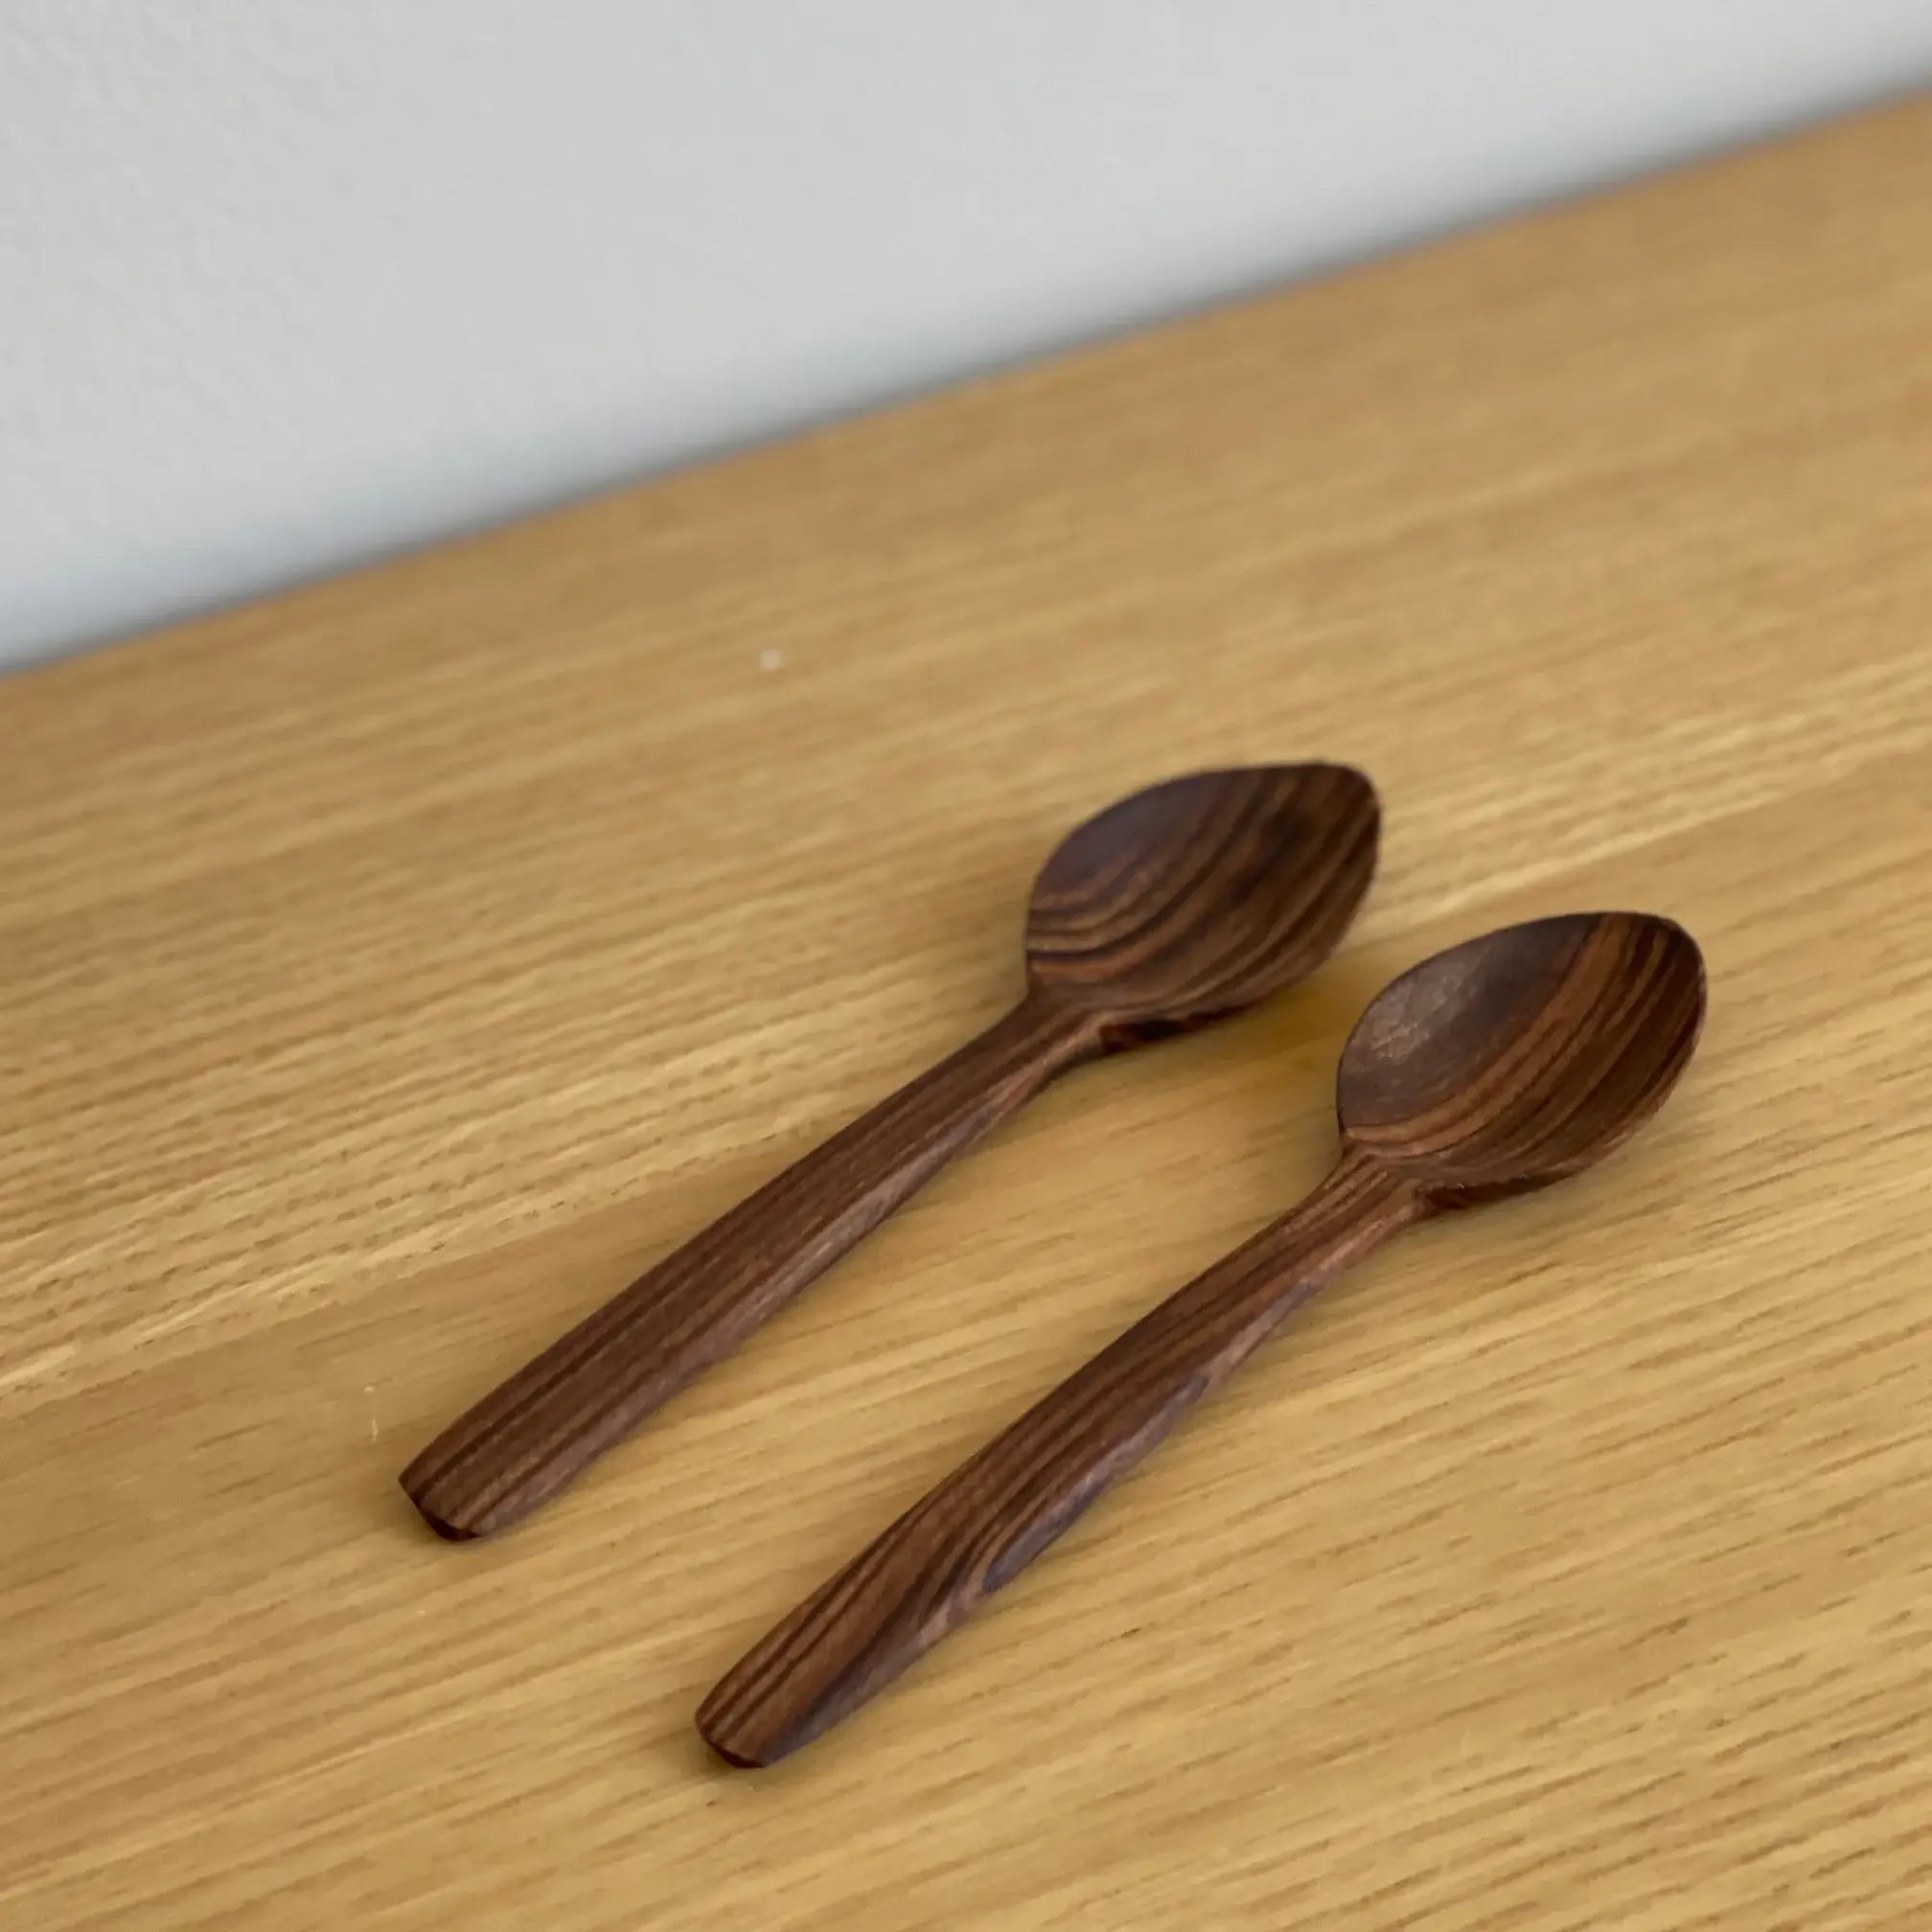 Dounia home Tea spoons in  made of Walnut wood, Close Up View 